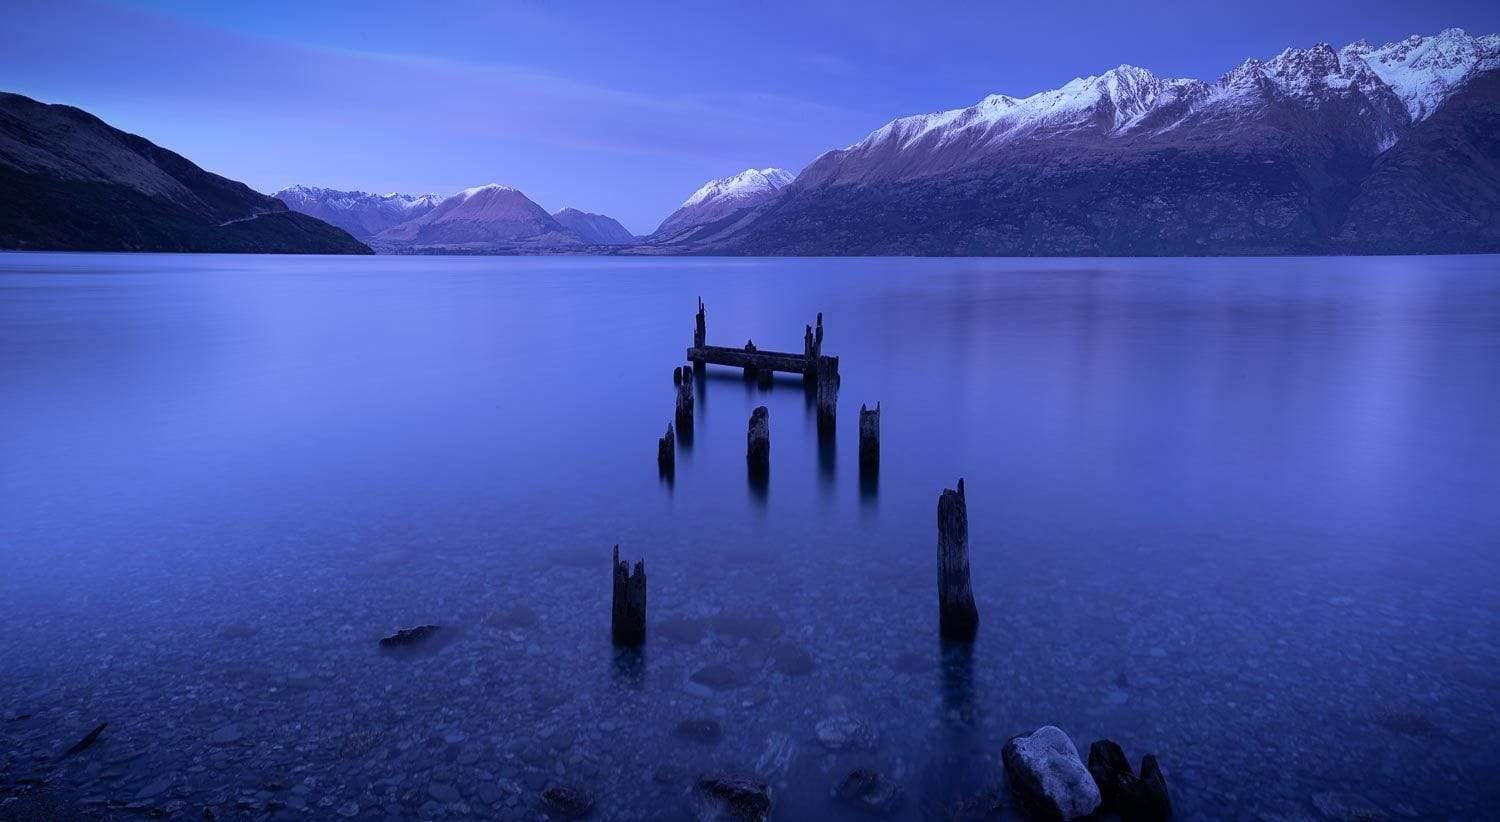 Small wooden sticks in the lake with some mountain walls behind, Ruined Jetty, Glenorchy New Zealand